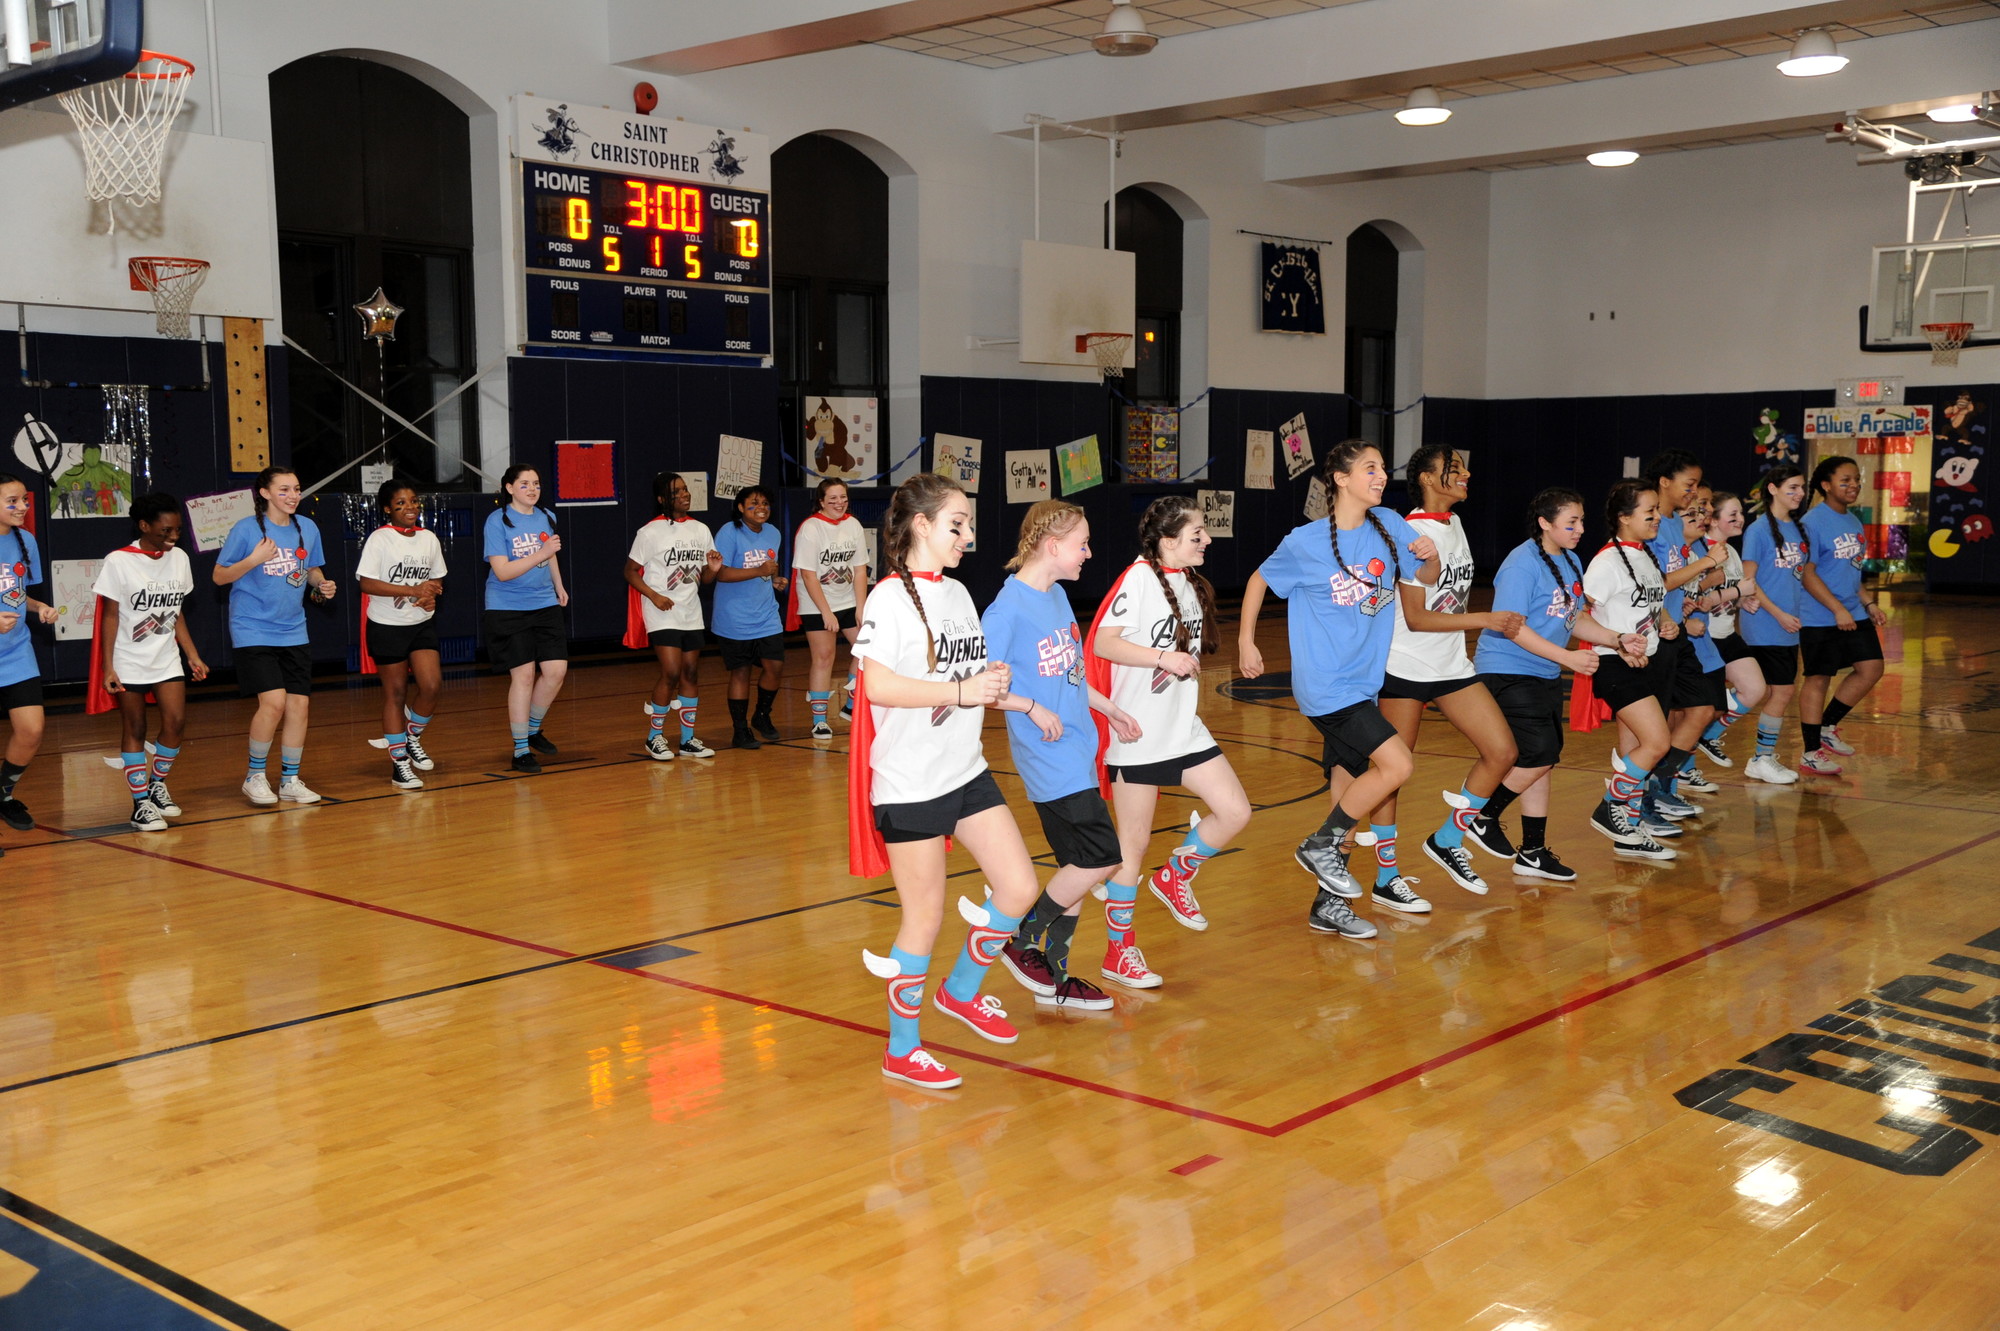 Girls on the Blue Arcade and The White Avengers teams at St. Christopher School’s Sportsnite joined together for a celebratory dance last Friday.